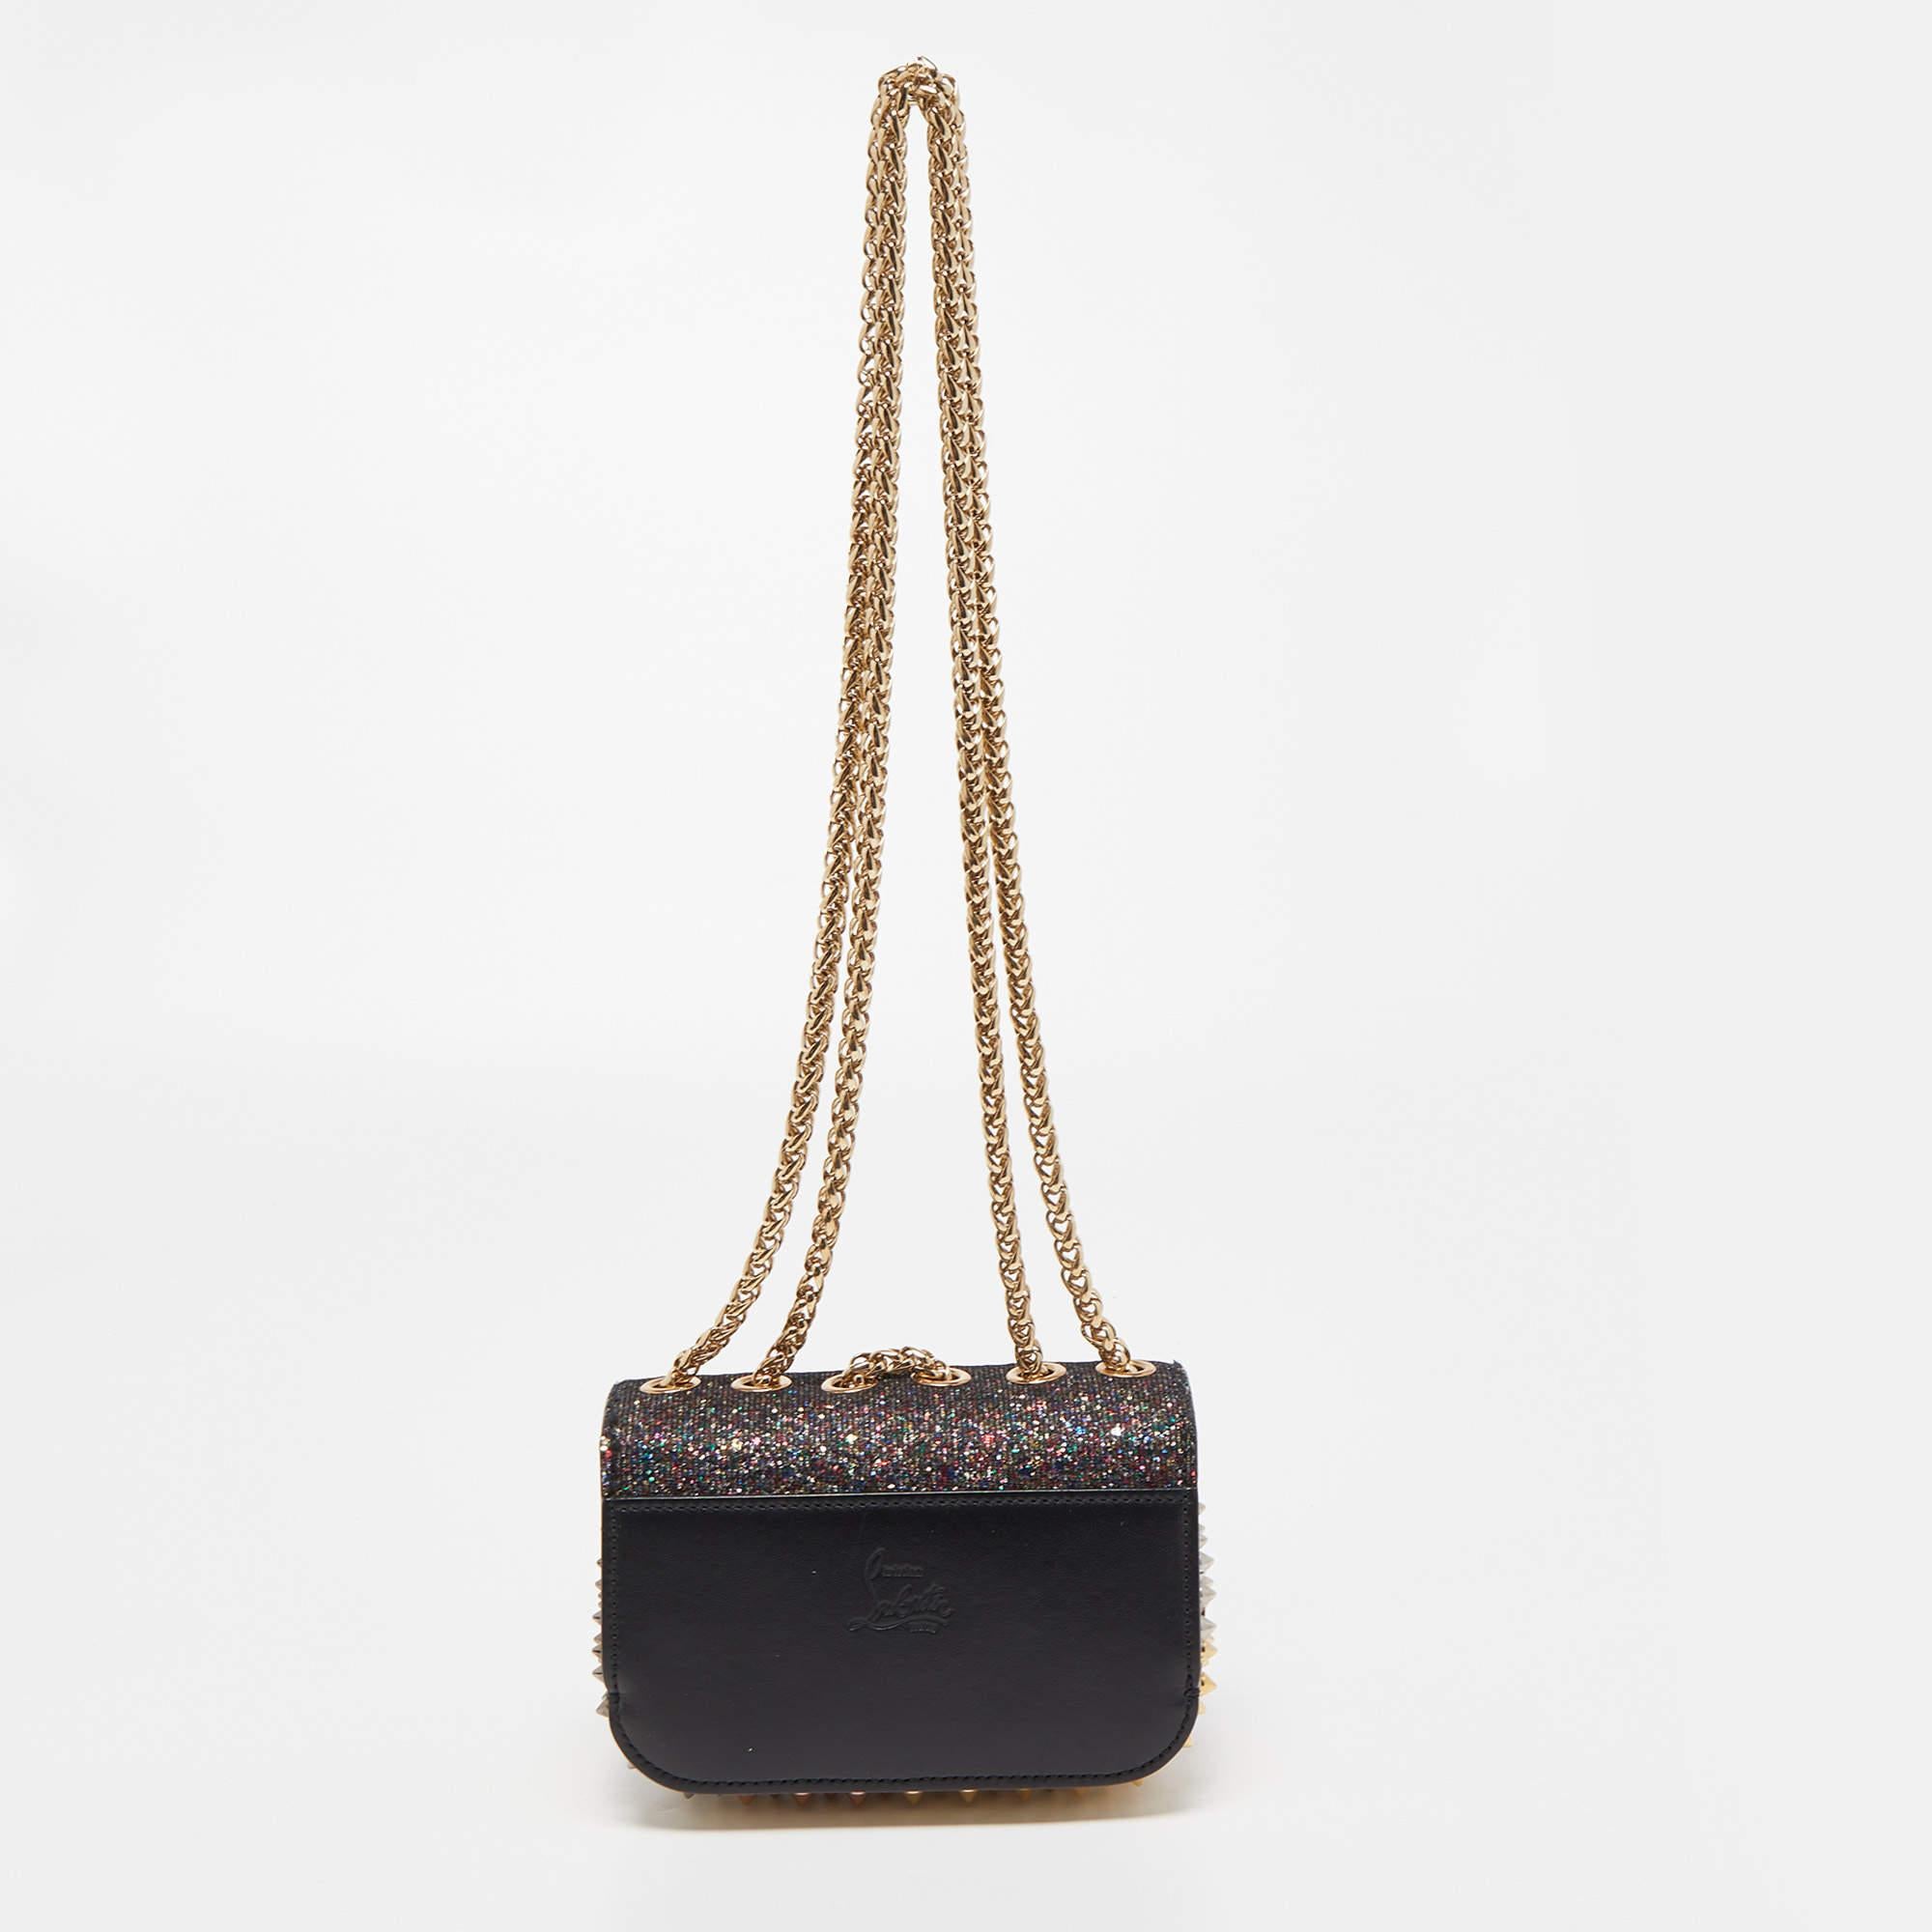 This modern and edgy Sweet Charity bag is from Christian Louboutin. Crafted from multicolor glitter, the bag comes with eye-catching spike embellishments . The insides are suede-lined and the bag is complete with a chain strap. Invest in this superb